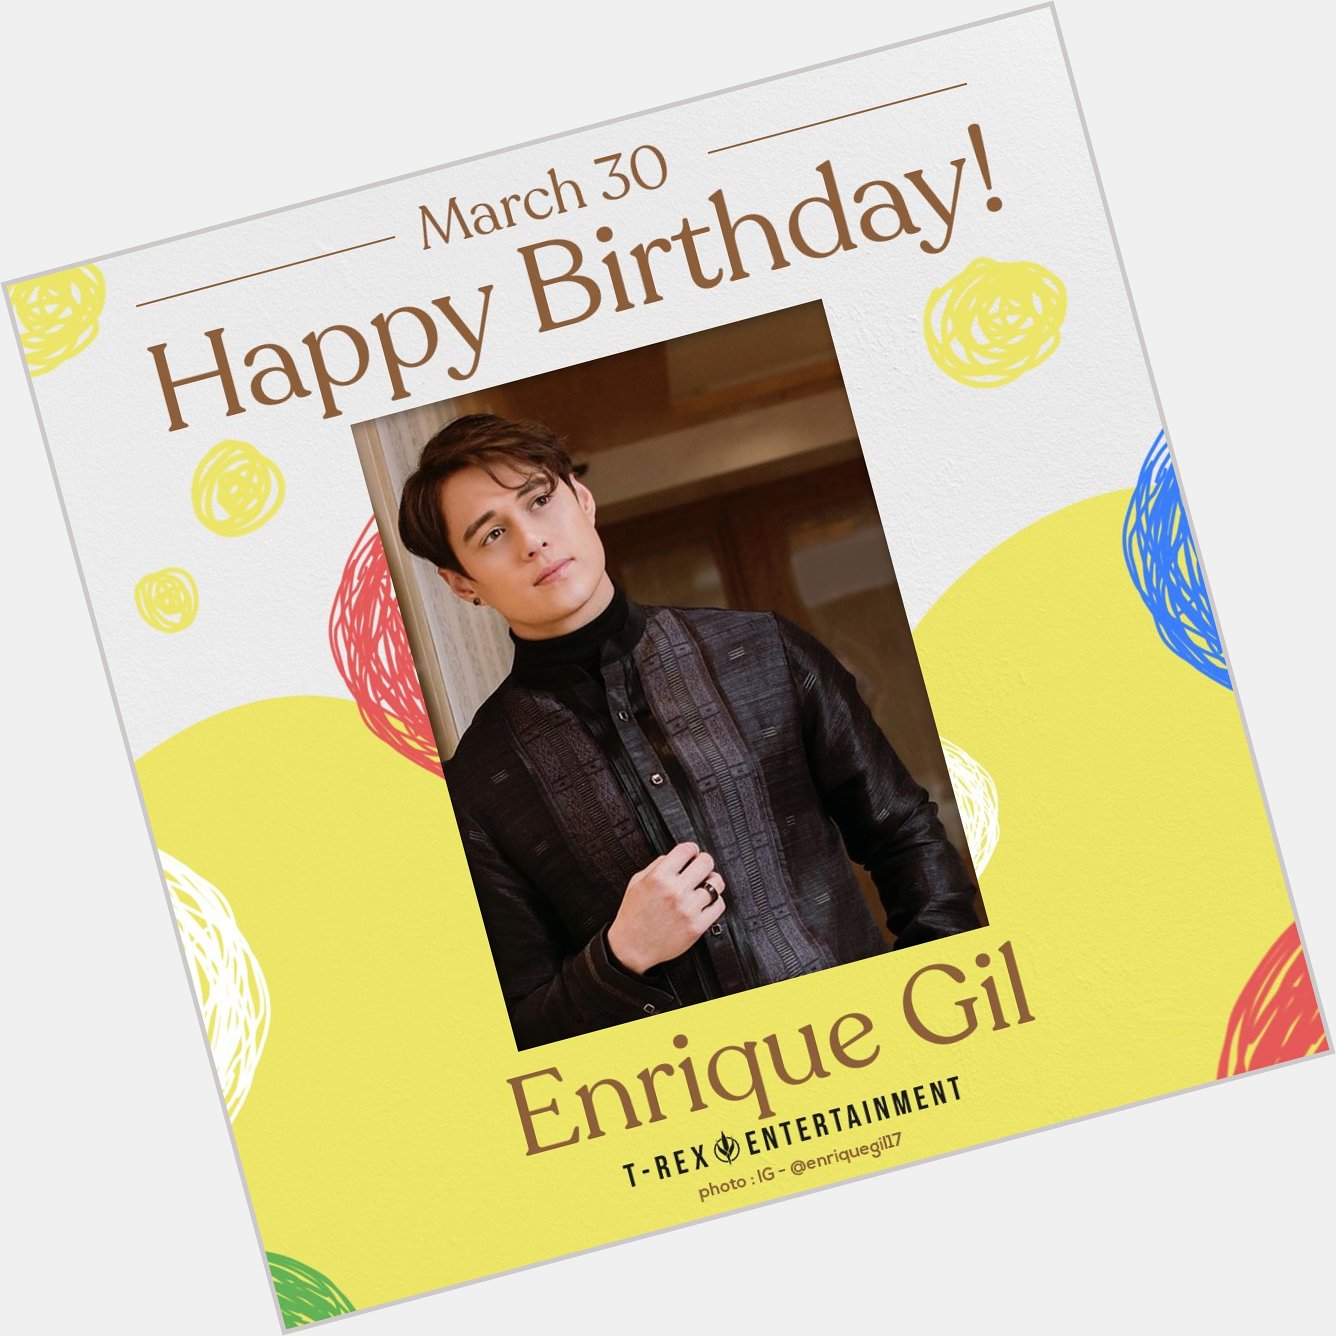 Happy 28th birthday, Enrique Gil! Have a blast today. :)

Trivia: His full name is Enrique Mari Bacay Gil V. 